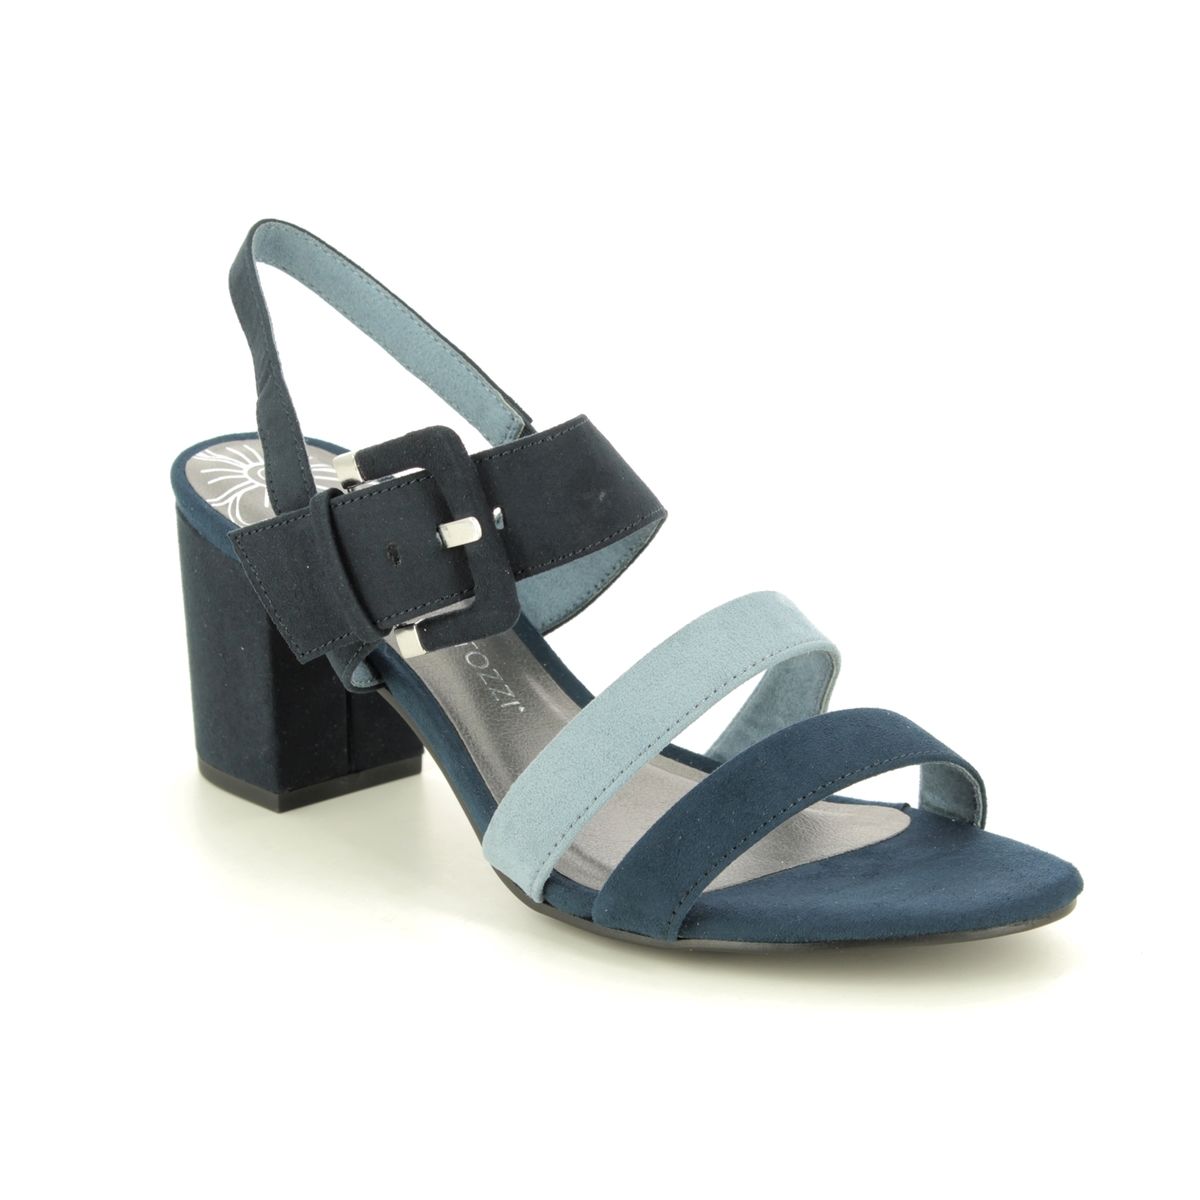 Marco Tozzi Paduckle 28323-24-888 Navy Heeled Sandals